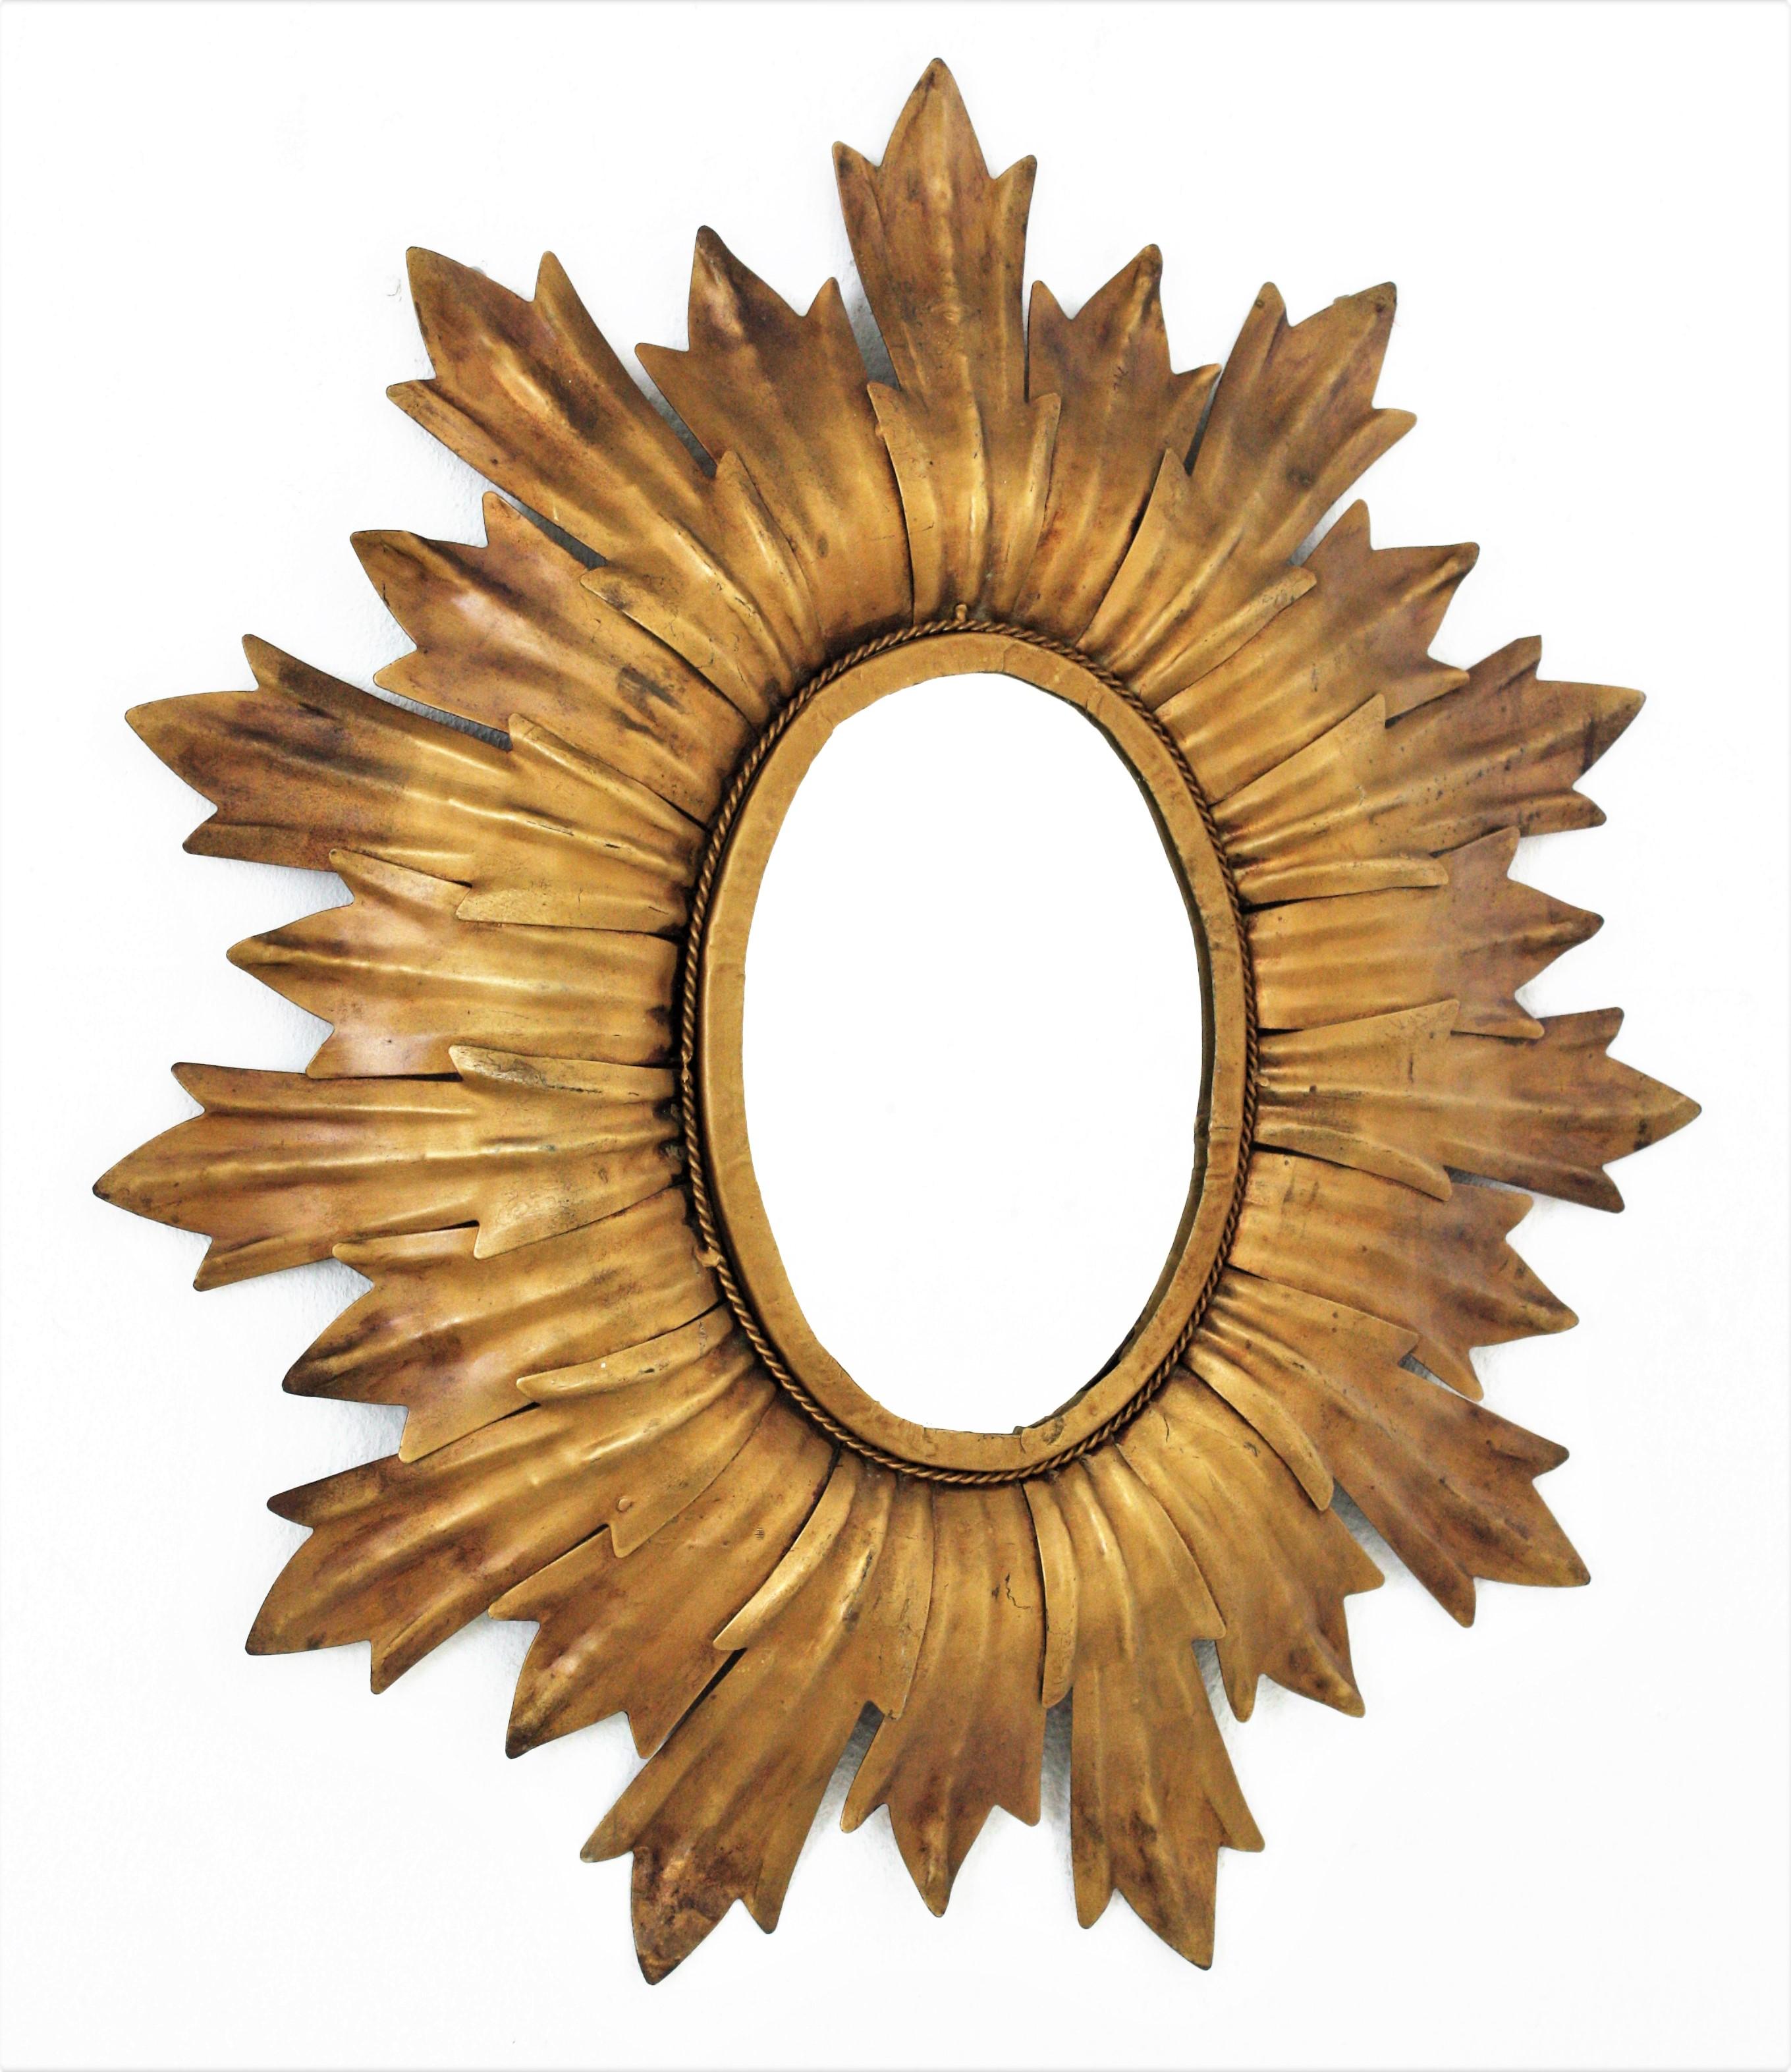 Oval sunburst mirror, Gilt iron. France, 1960s
This hand-hammered iron sunburst wall mirror features a leafed oval frame surrounding the glass
It has a nice patina showing its original gilt finish.
The design combining Hollywood Regency and